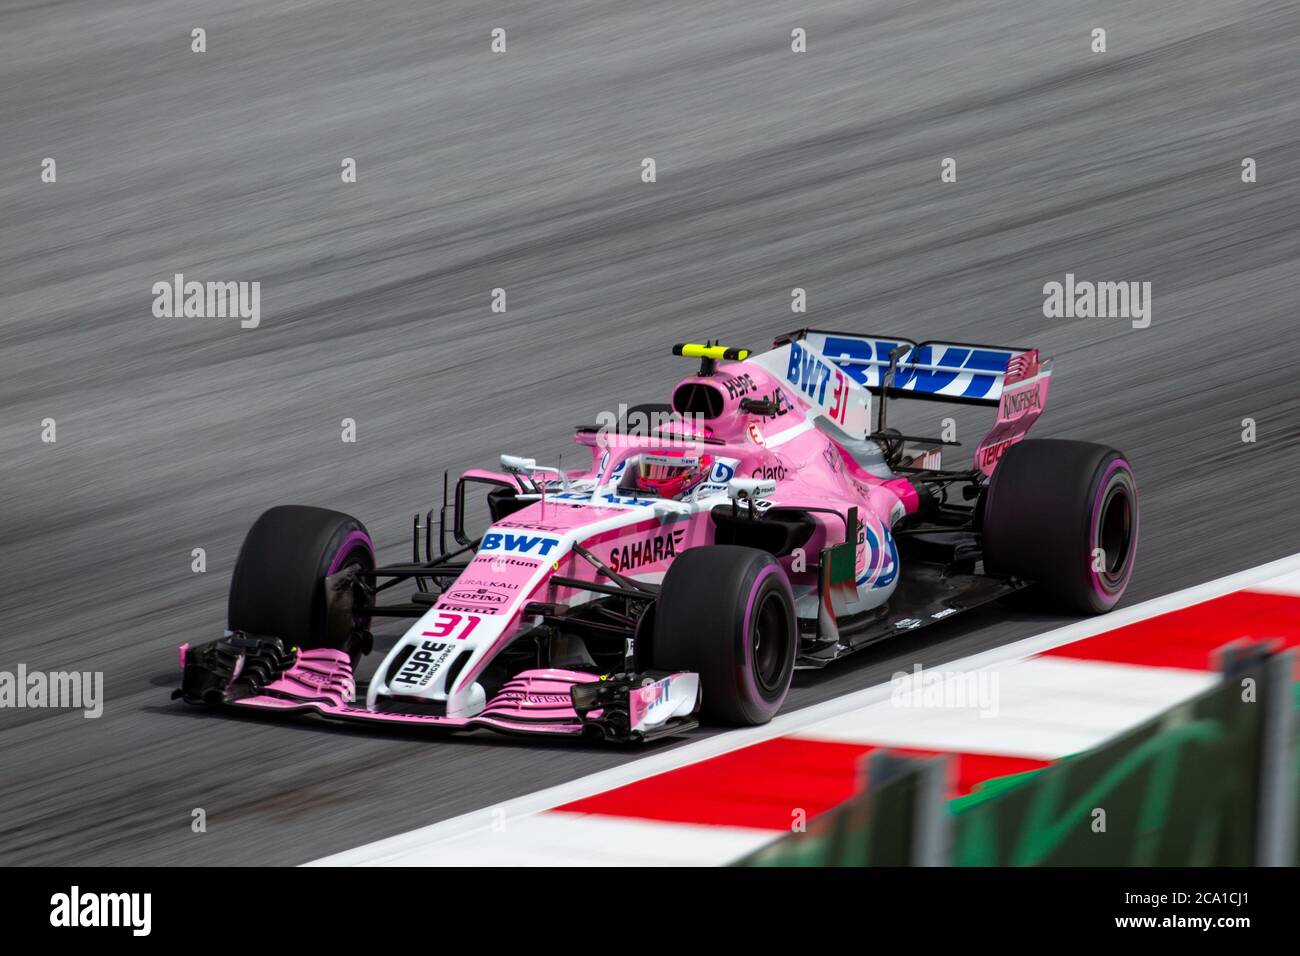 Esteban Ocon Driving his Force India VJM11 During Qualifying for the 2018 Austrian Grand Prix at the Red Bull Ring, Stock Photo